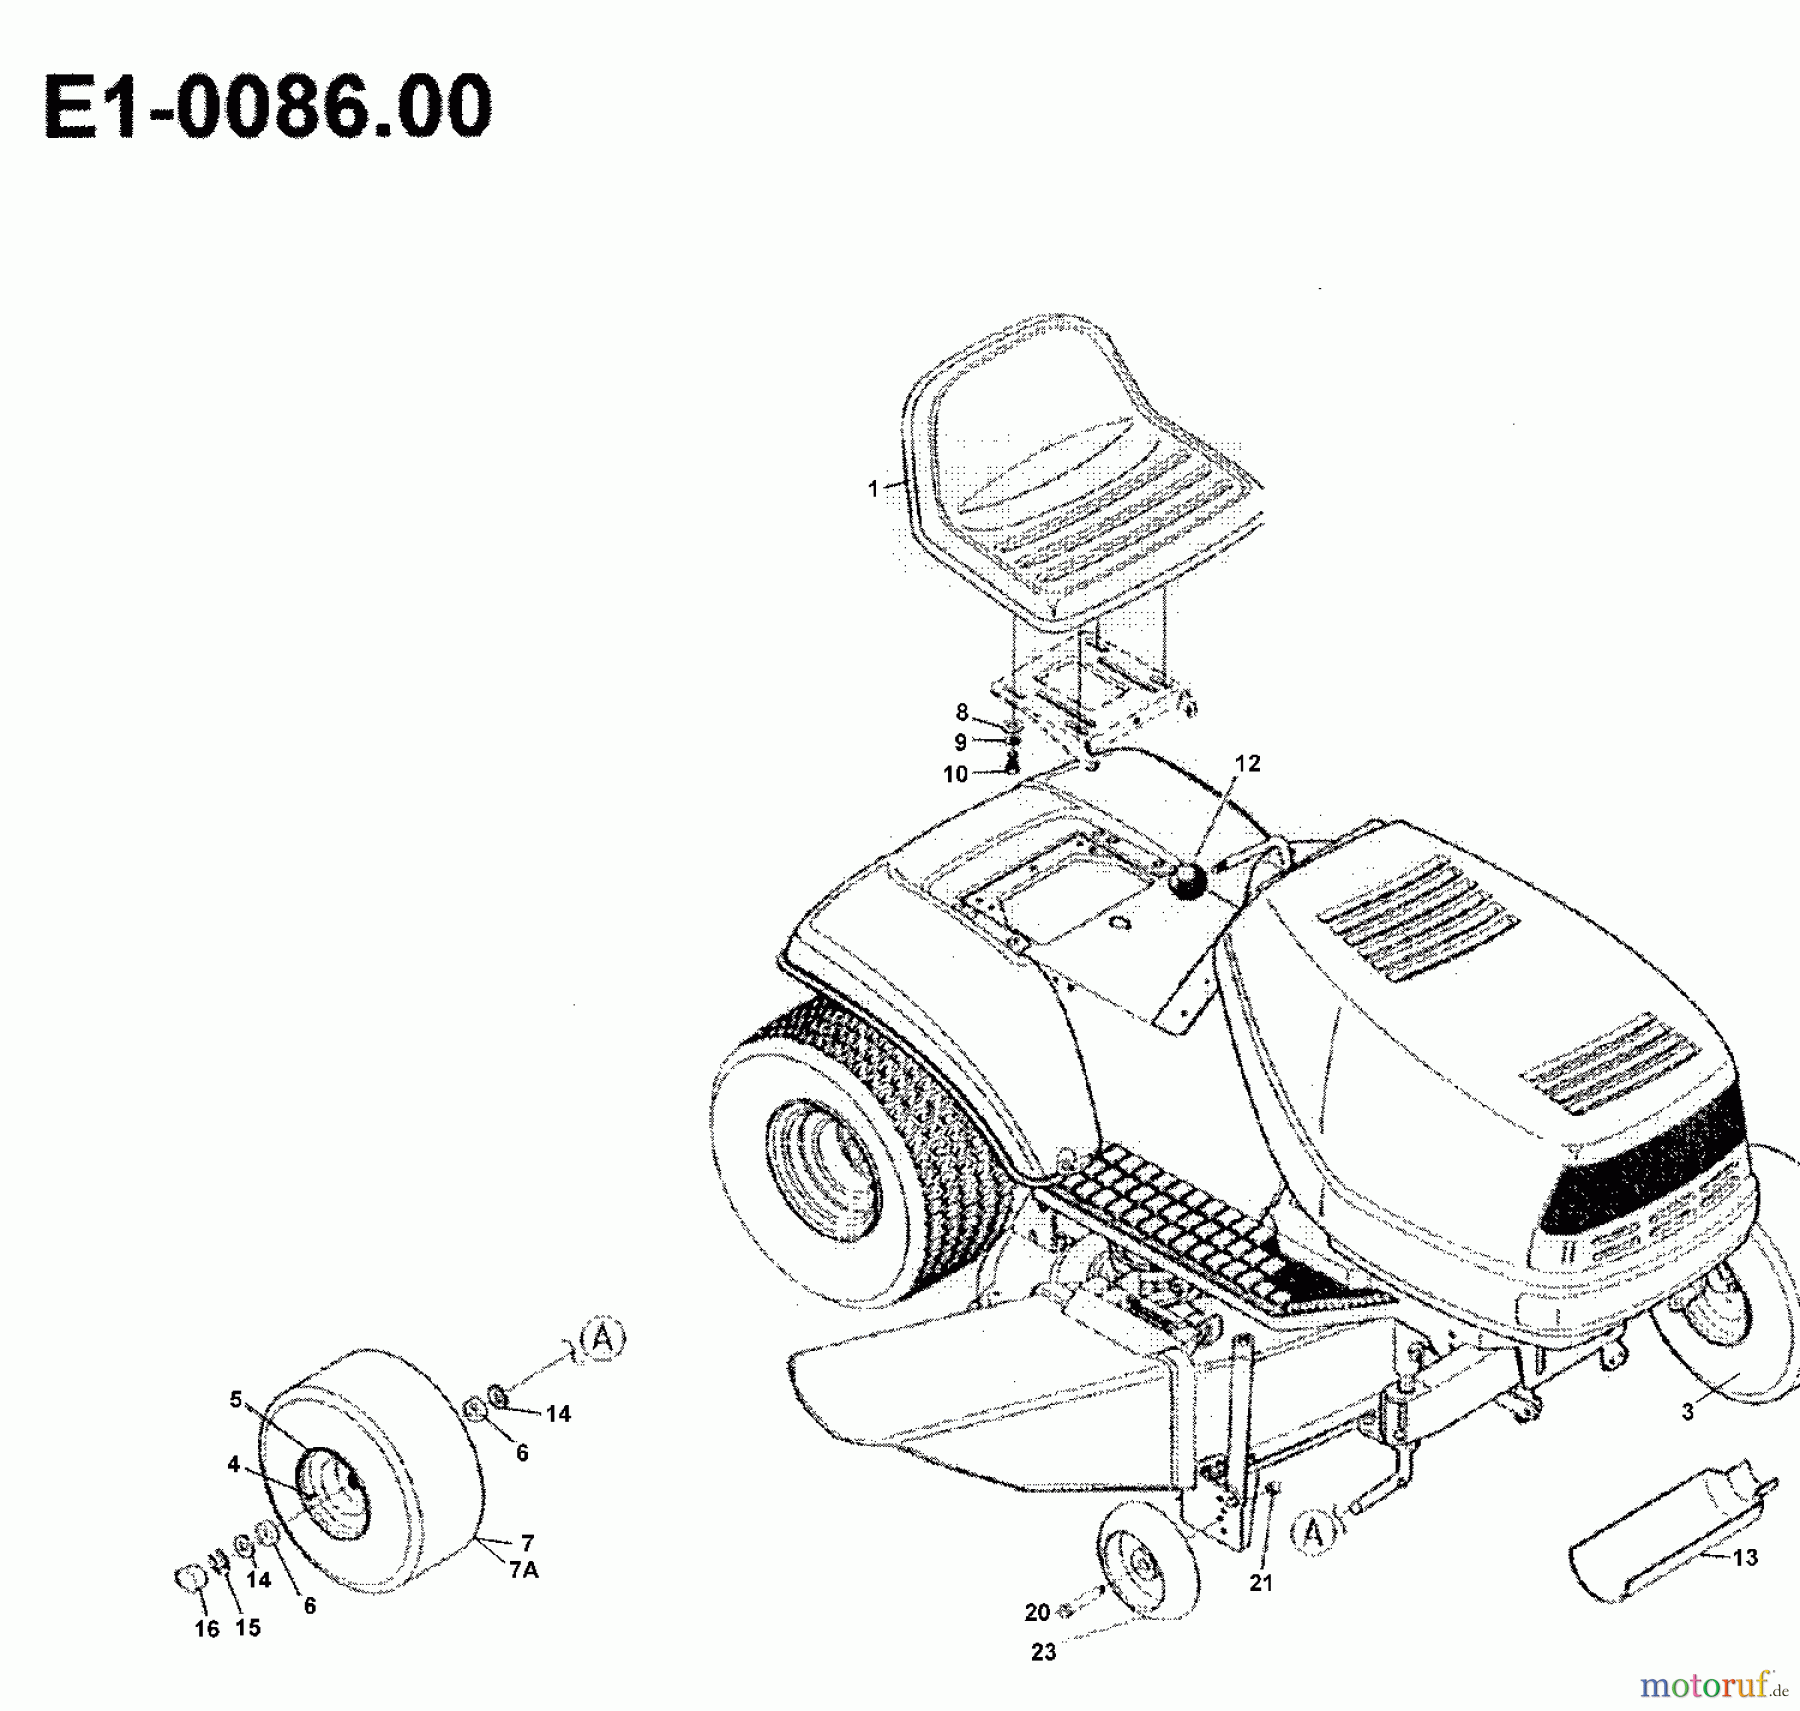  Gutbrod Lawn tractors 1114 AWS 00097.01  (1992) Seat